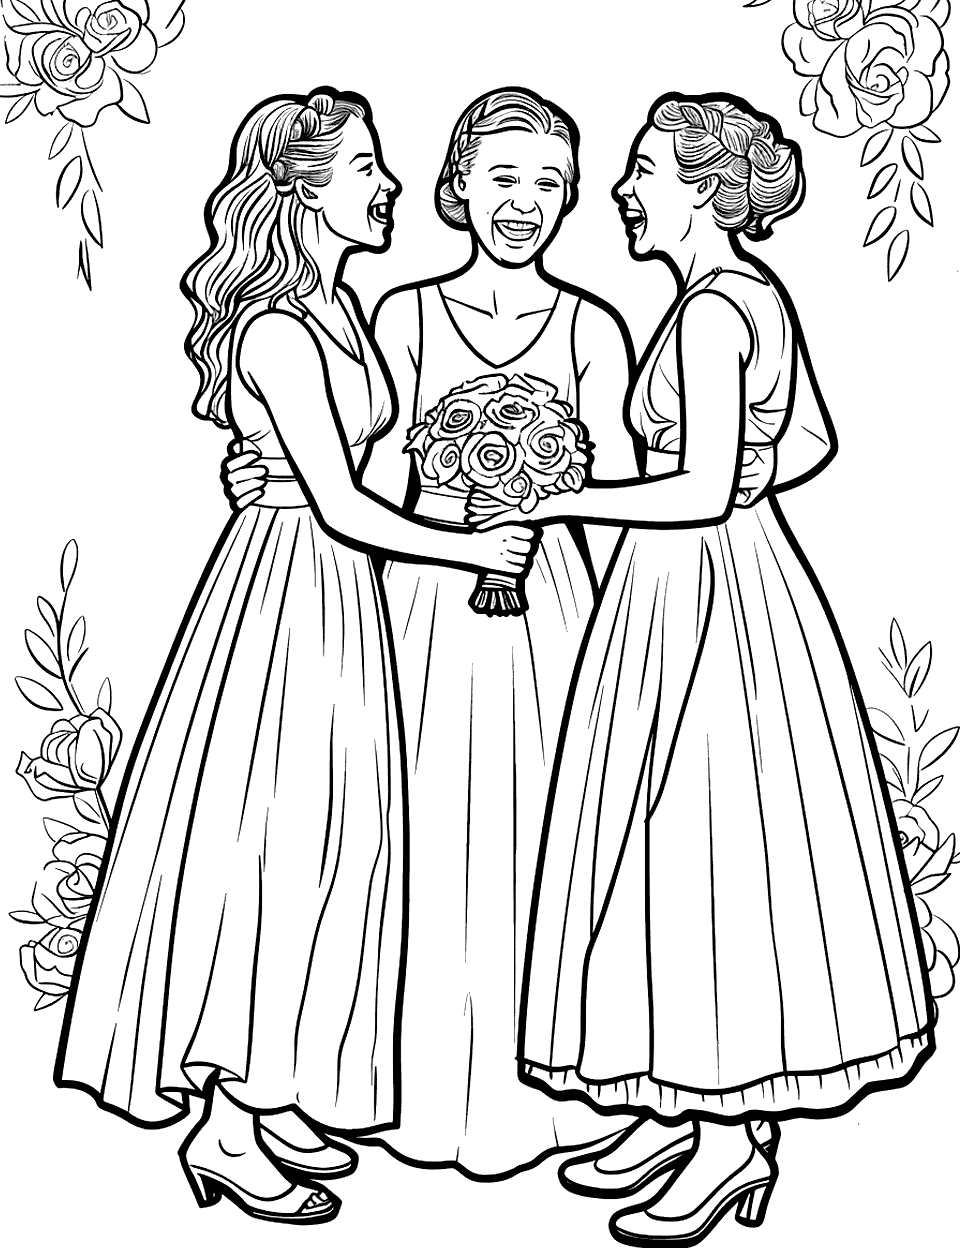 Getting Ready with Bridesmaids Wedding Coloring Page - A bride and her bridesmaids getting dressed and laughing together.